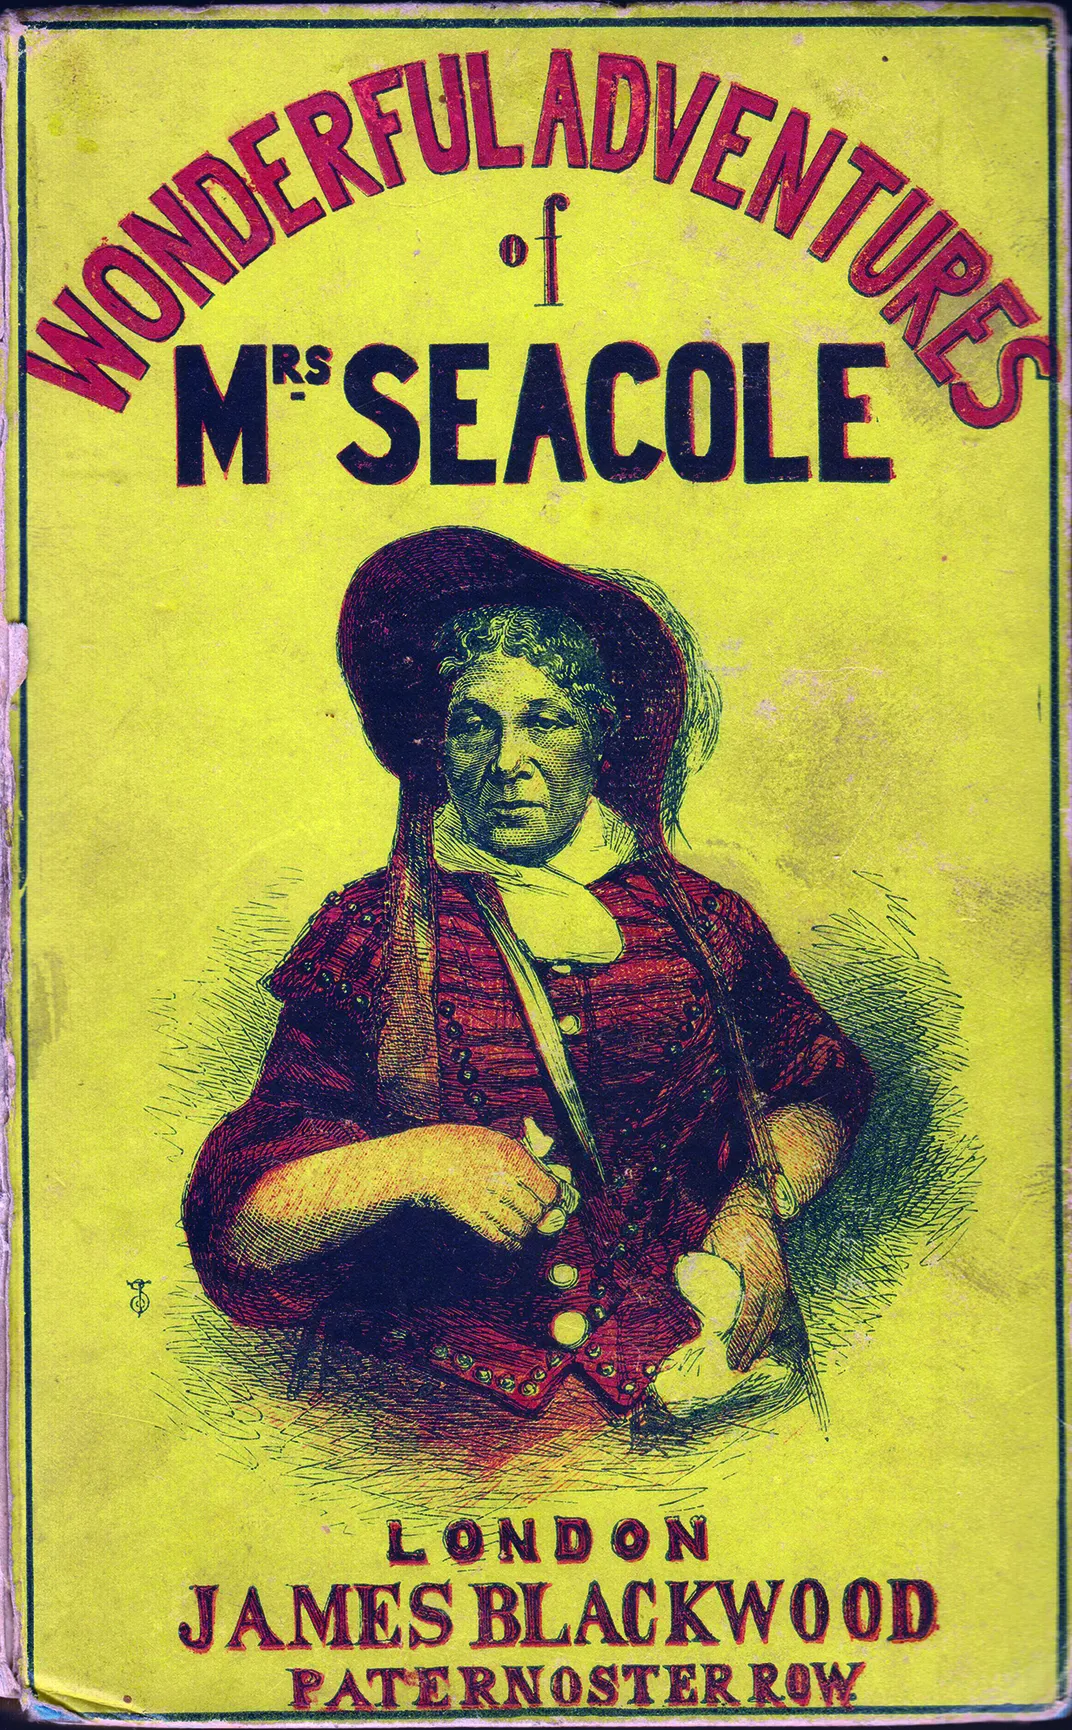 The Wonderful Adventures of Mrs Seacole